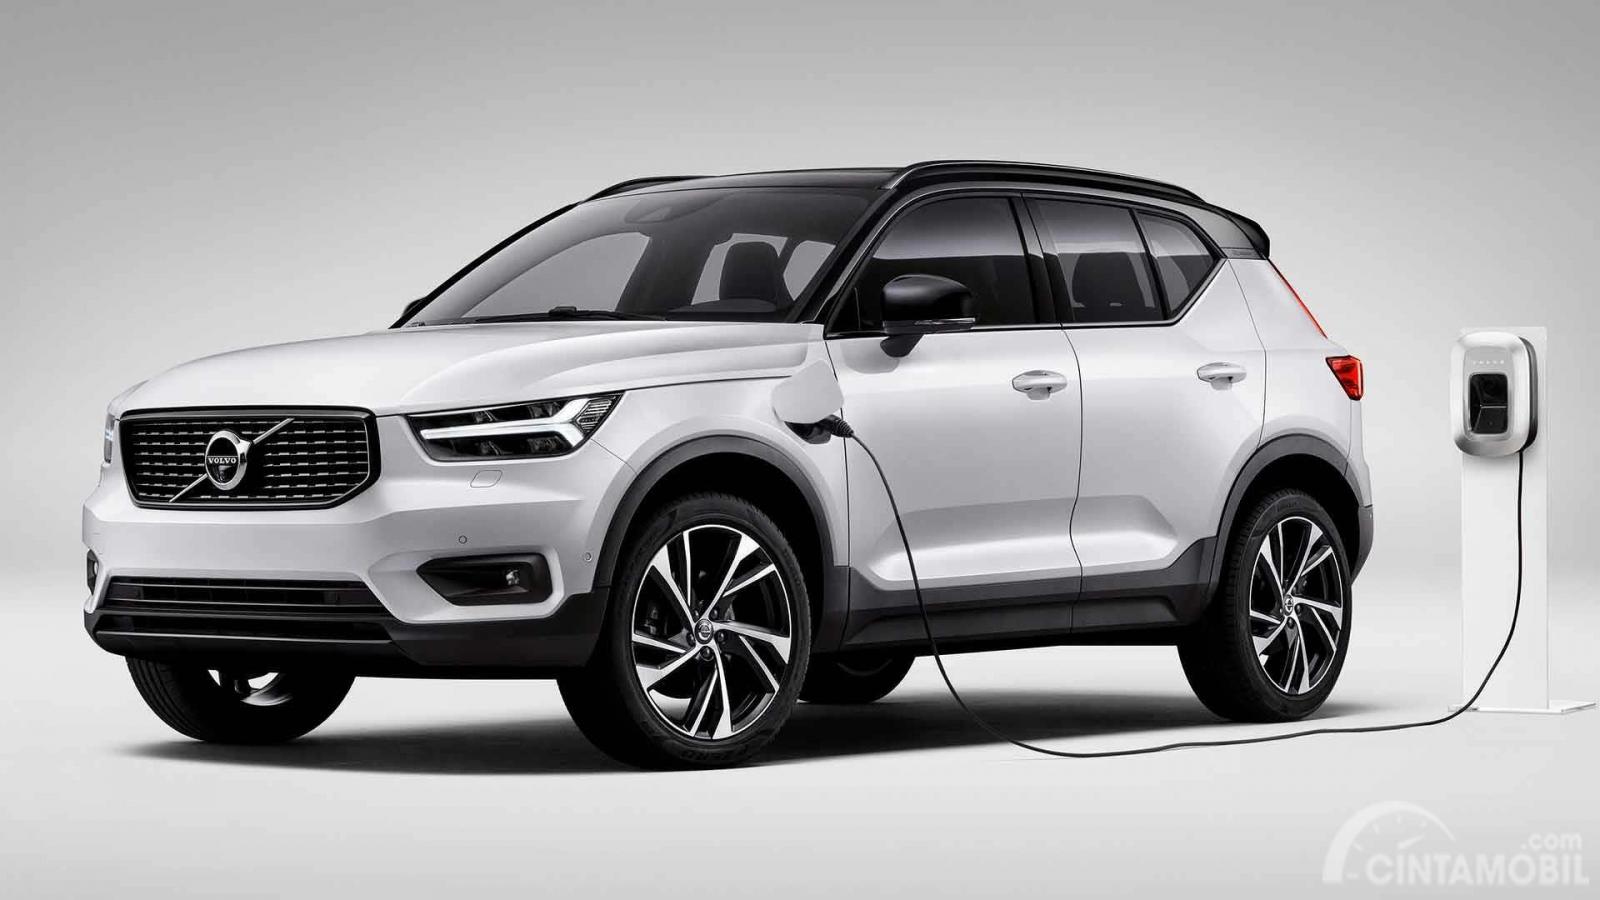 Volvo Xc40 At Brussels Motor Show Compact Crossover Suv Manufactured And Marketed By Volvo Cars Editorial Stock Photo Image Of Belgium Motorshow 172171113